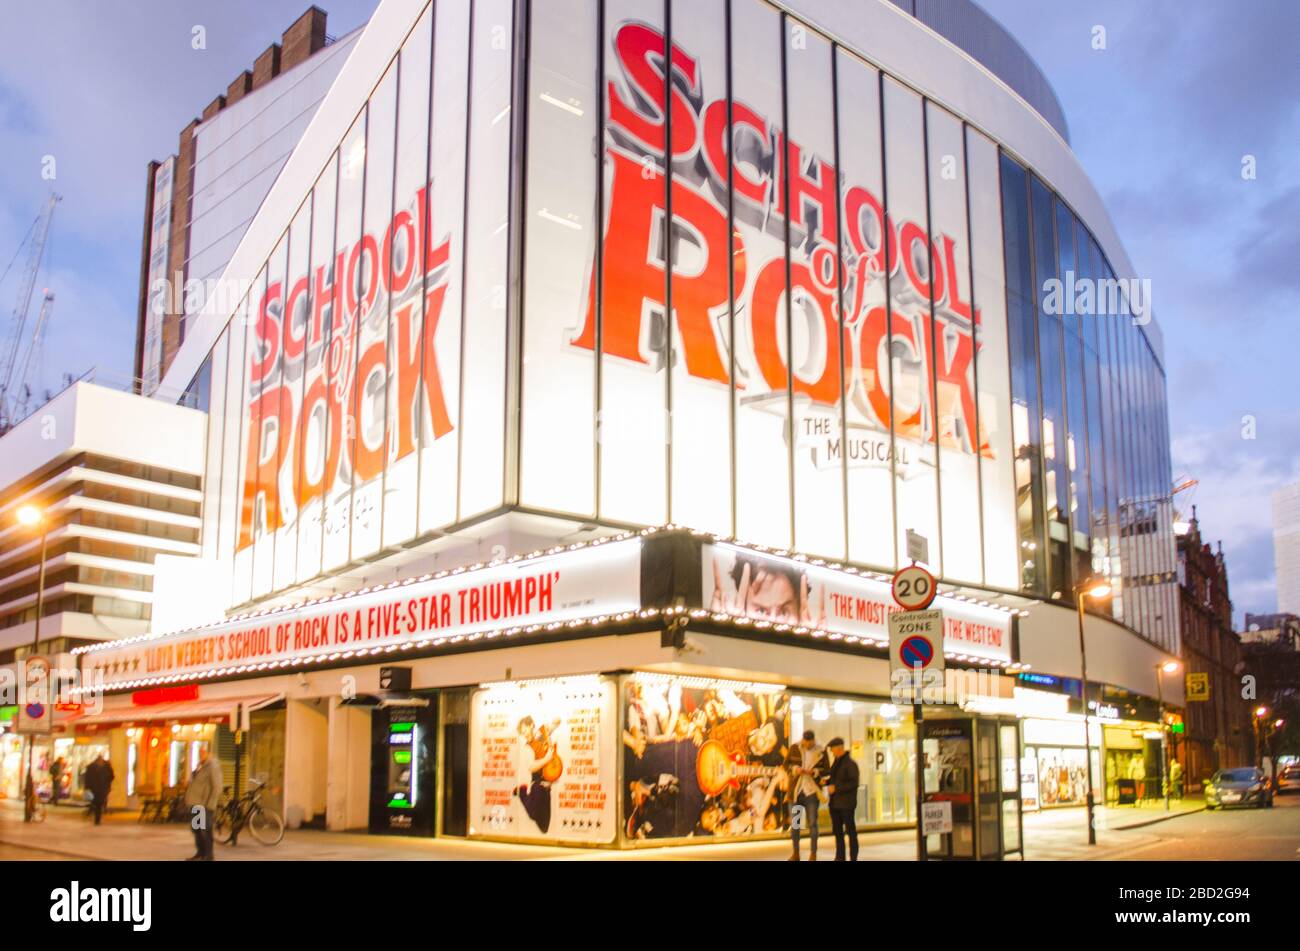 School of Rock theatre show in London's West End Stock Photo